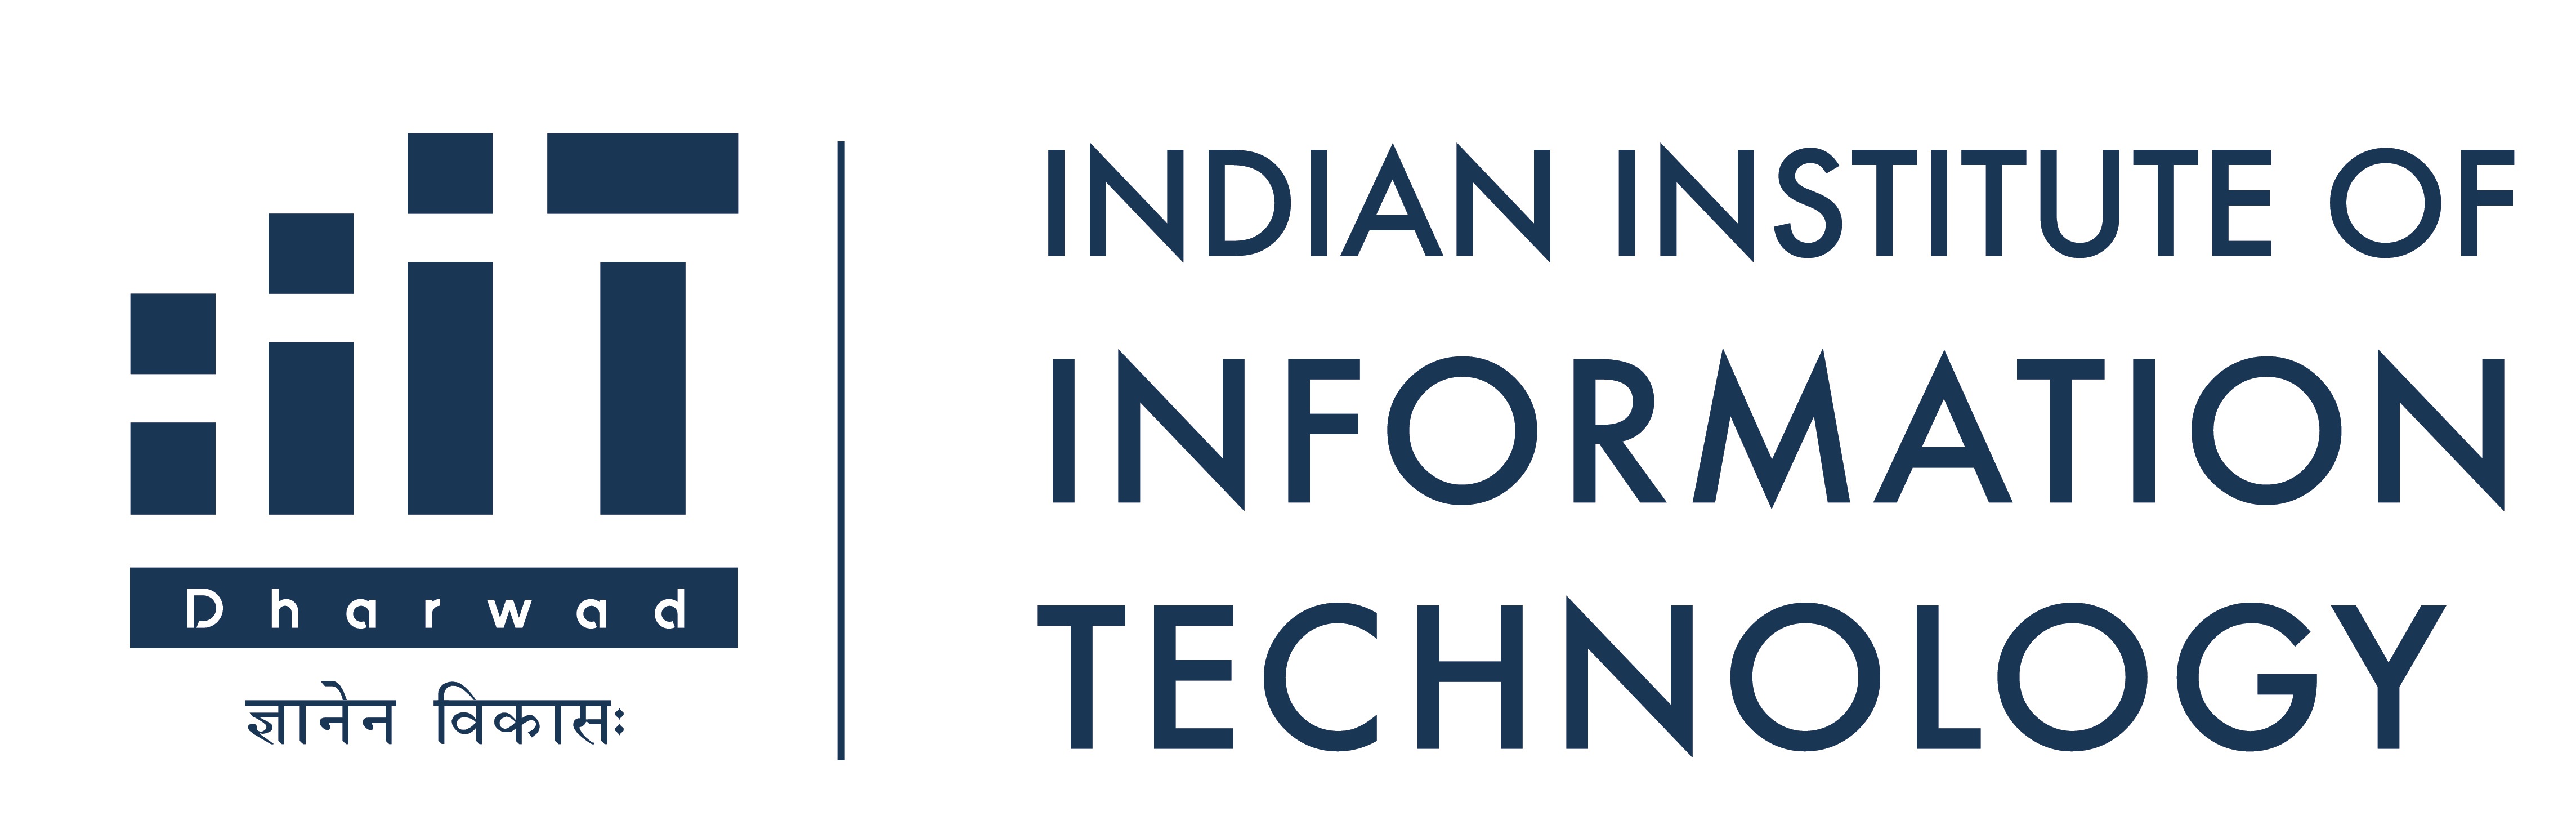 INDIAN INSTITUTE OF INFORMATION TECHNOLOGY DHARWAD